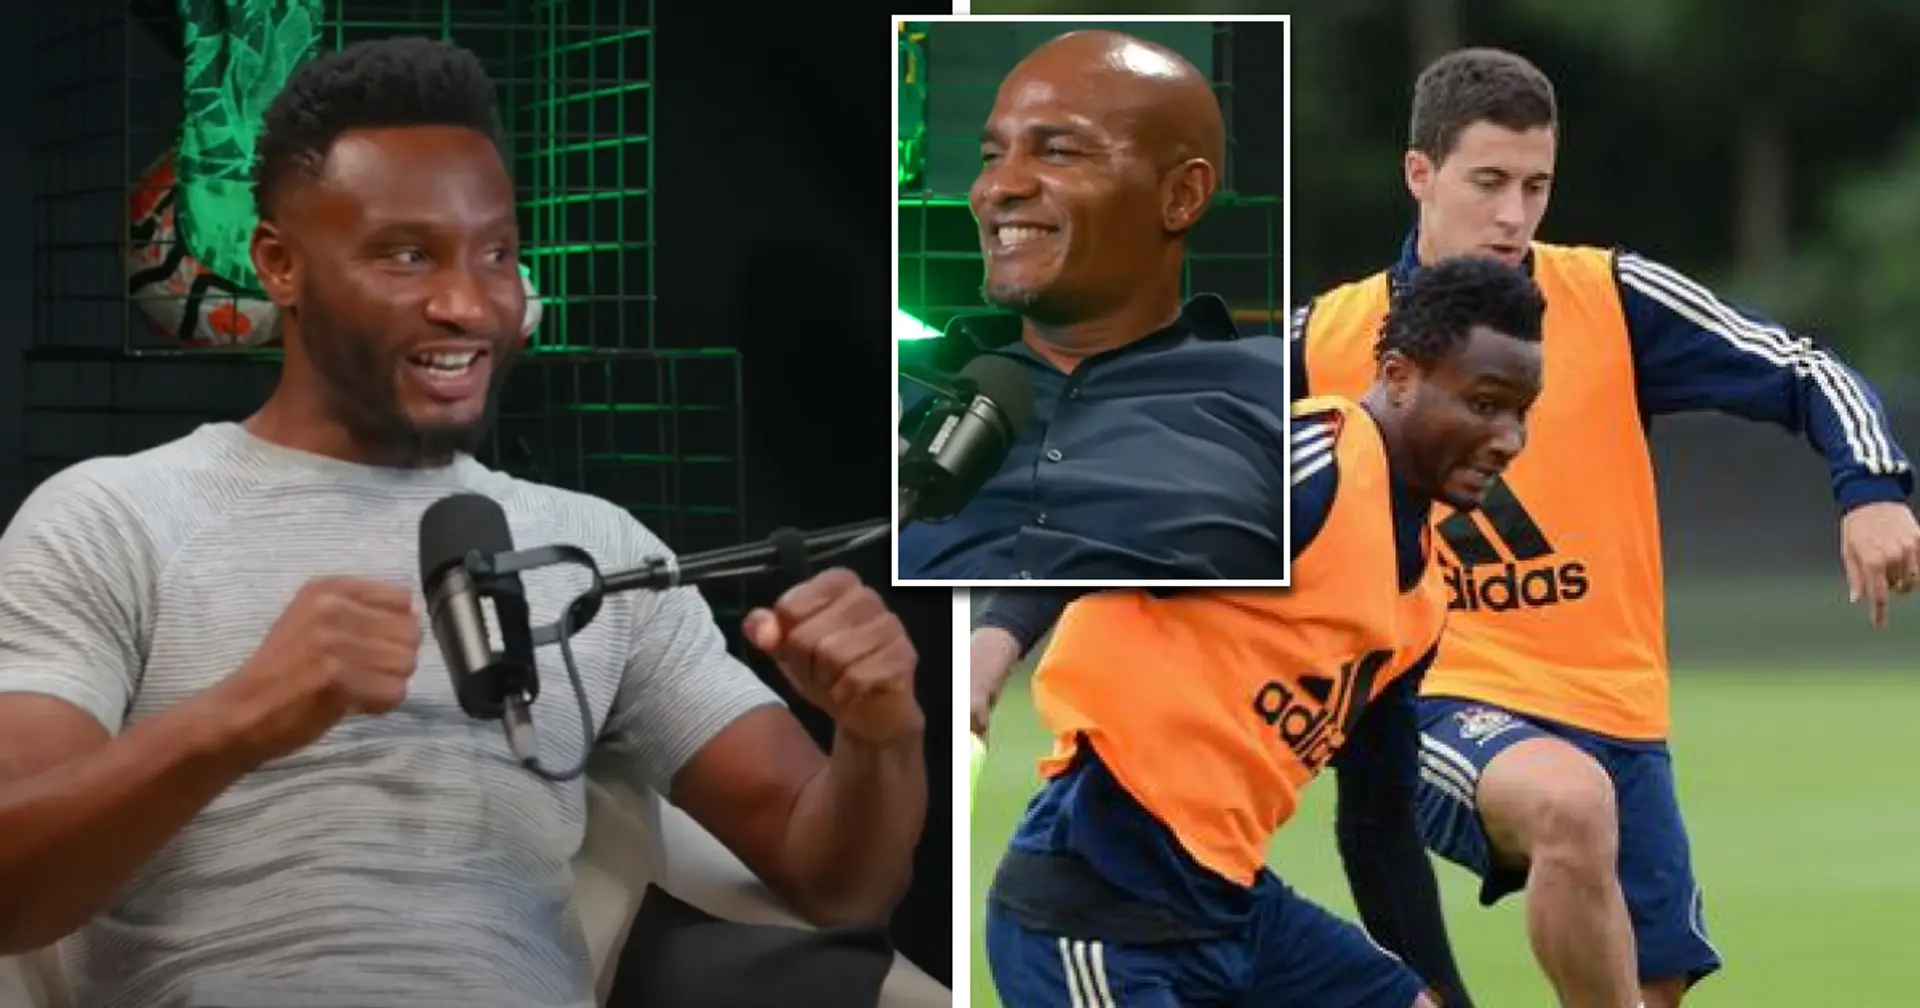 'And then we squared up with each other': Obi Mikel recalls crazy bust-up in training with ex-Chelsea star